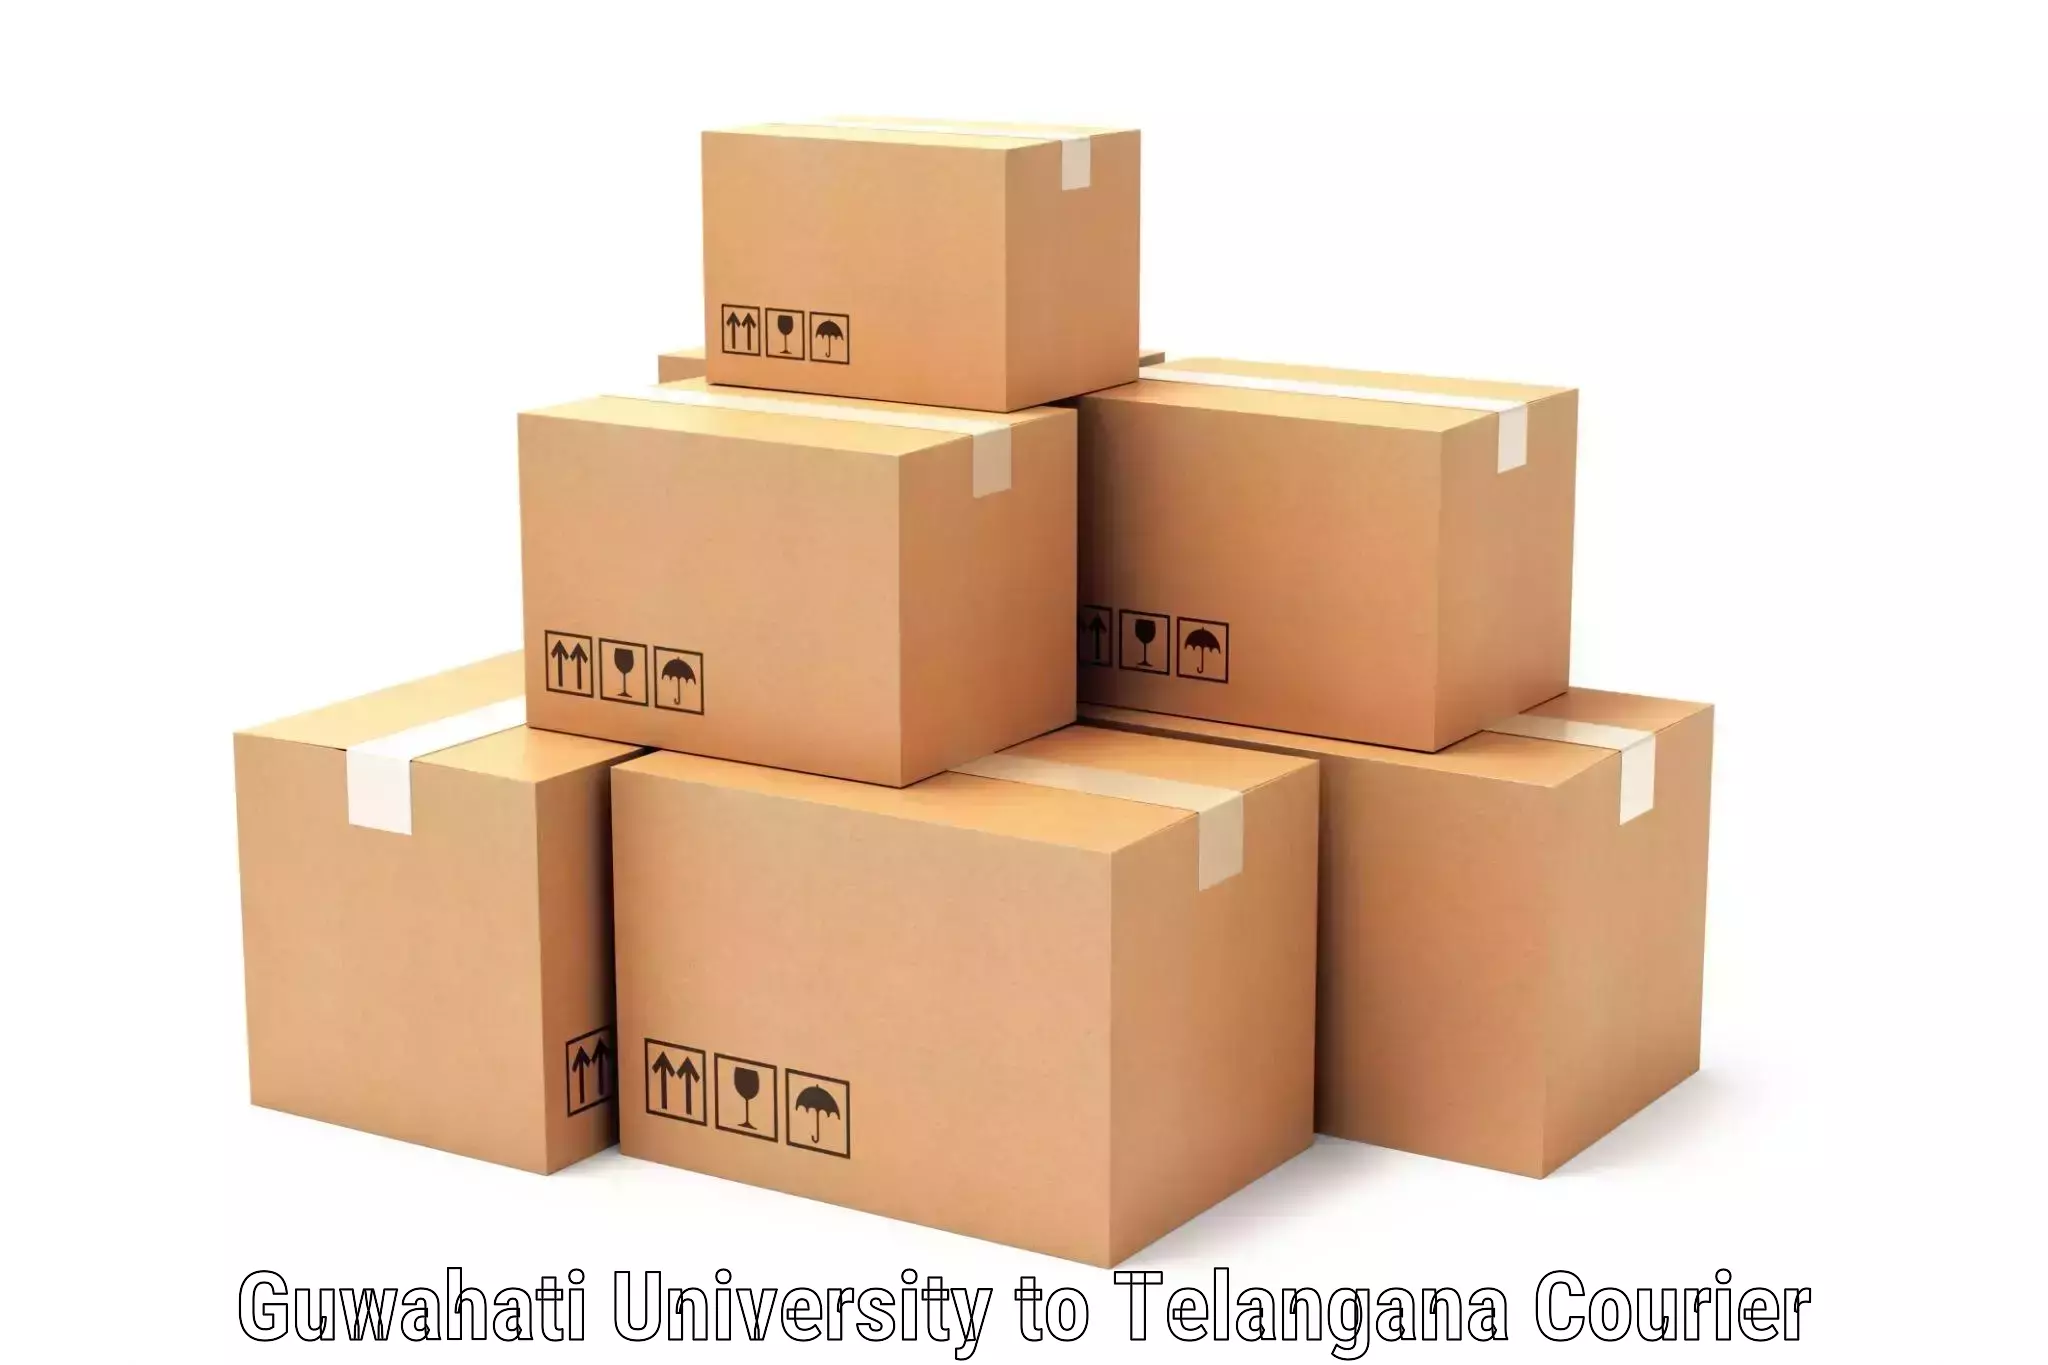 Reliable parcel services Guwahati University to Alair